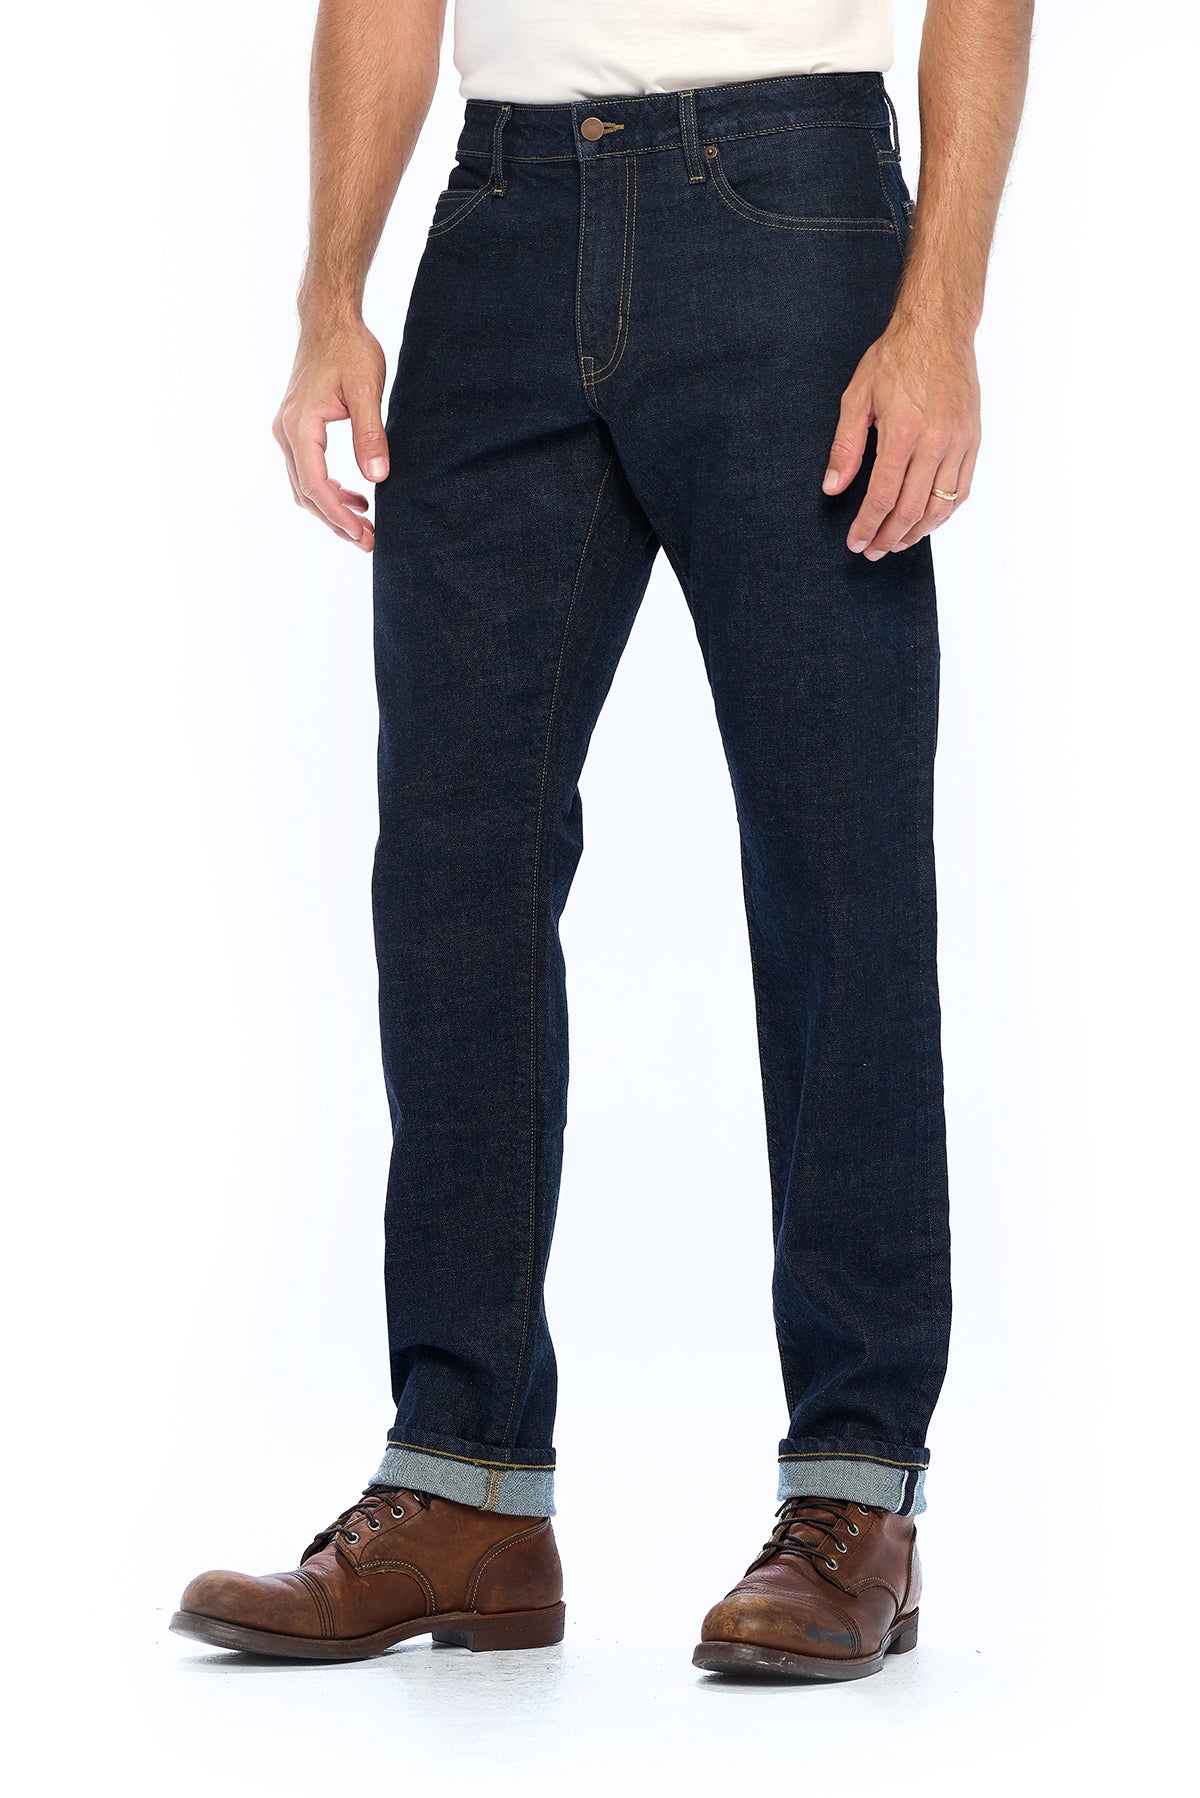 Aviator travel jeans special edition made with Japanese selvedge denim